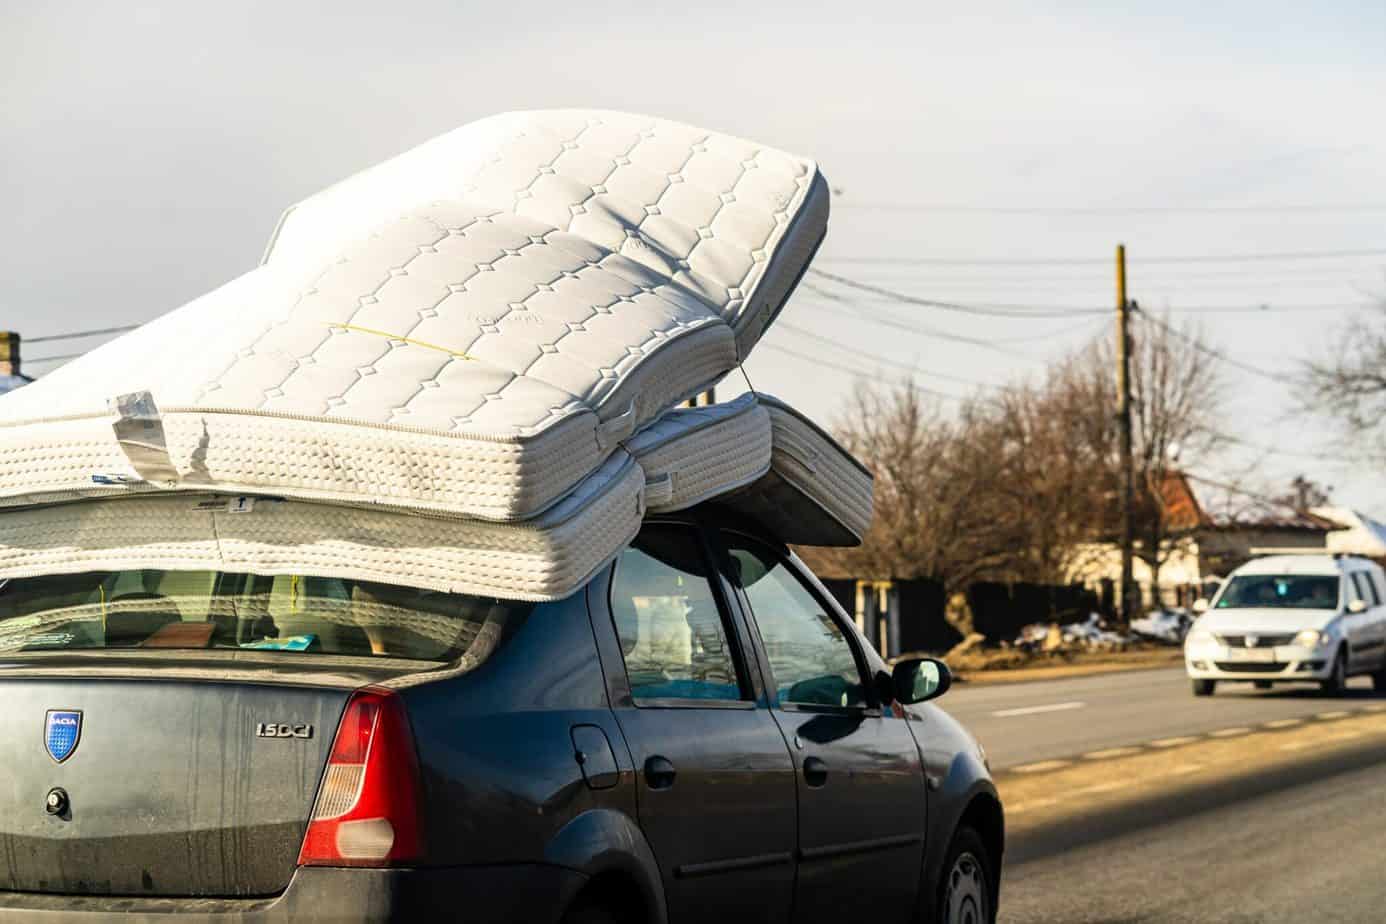 is moving mattress on top of car illegal